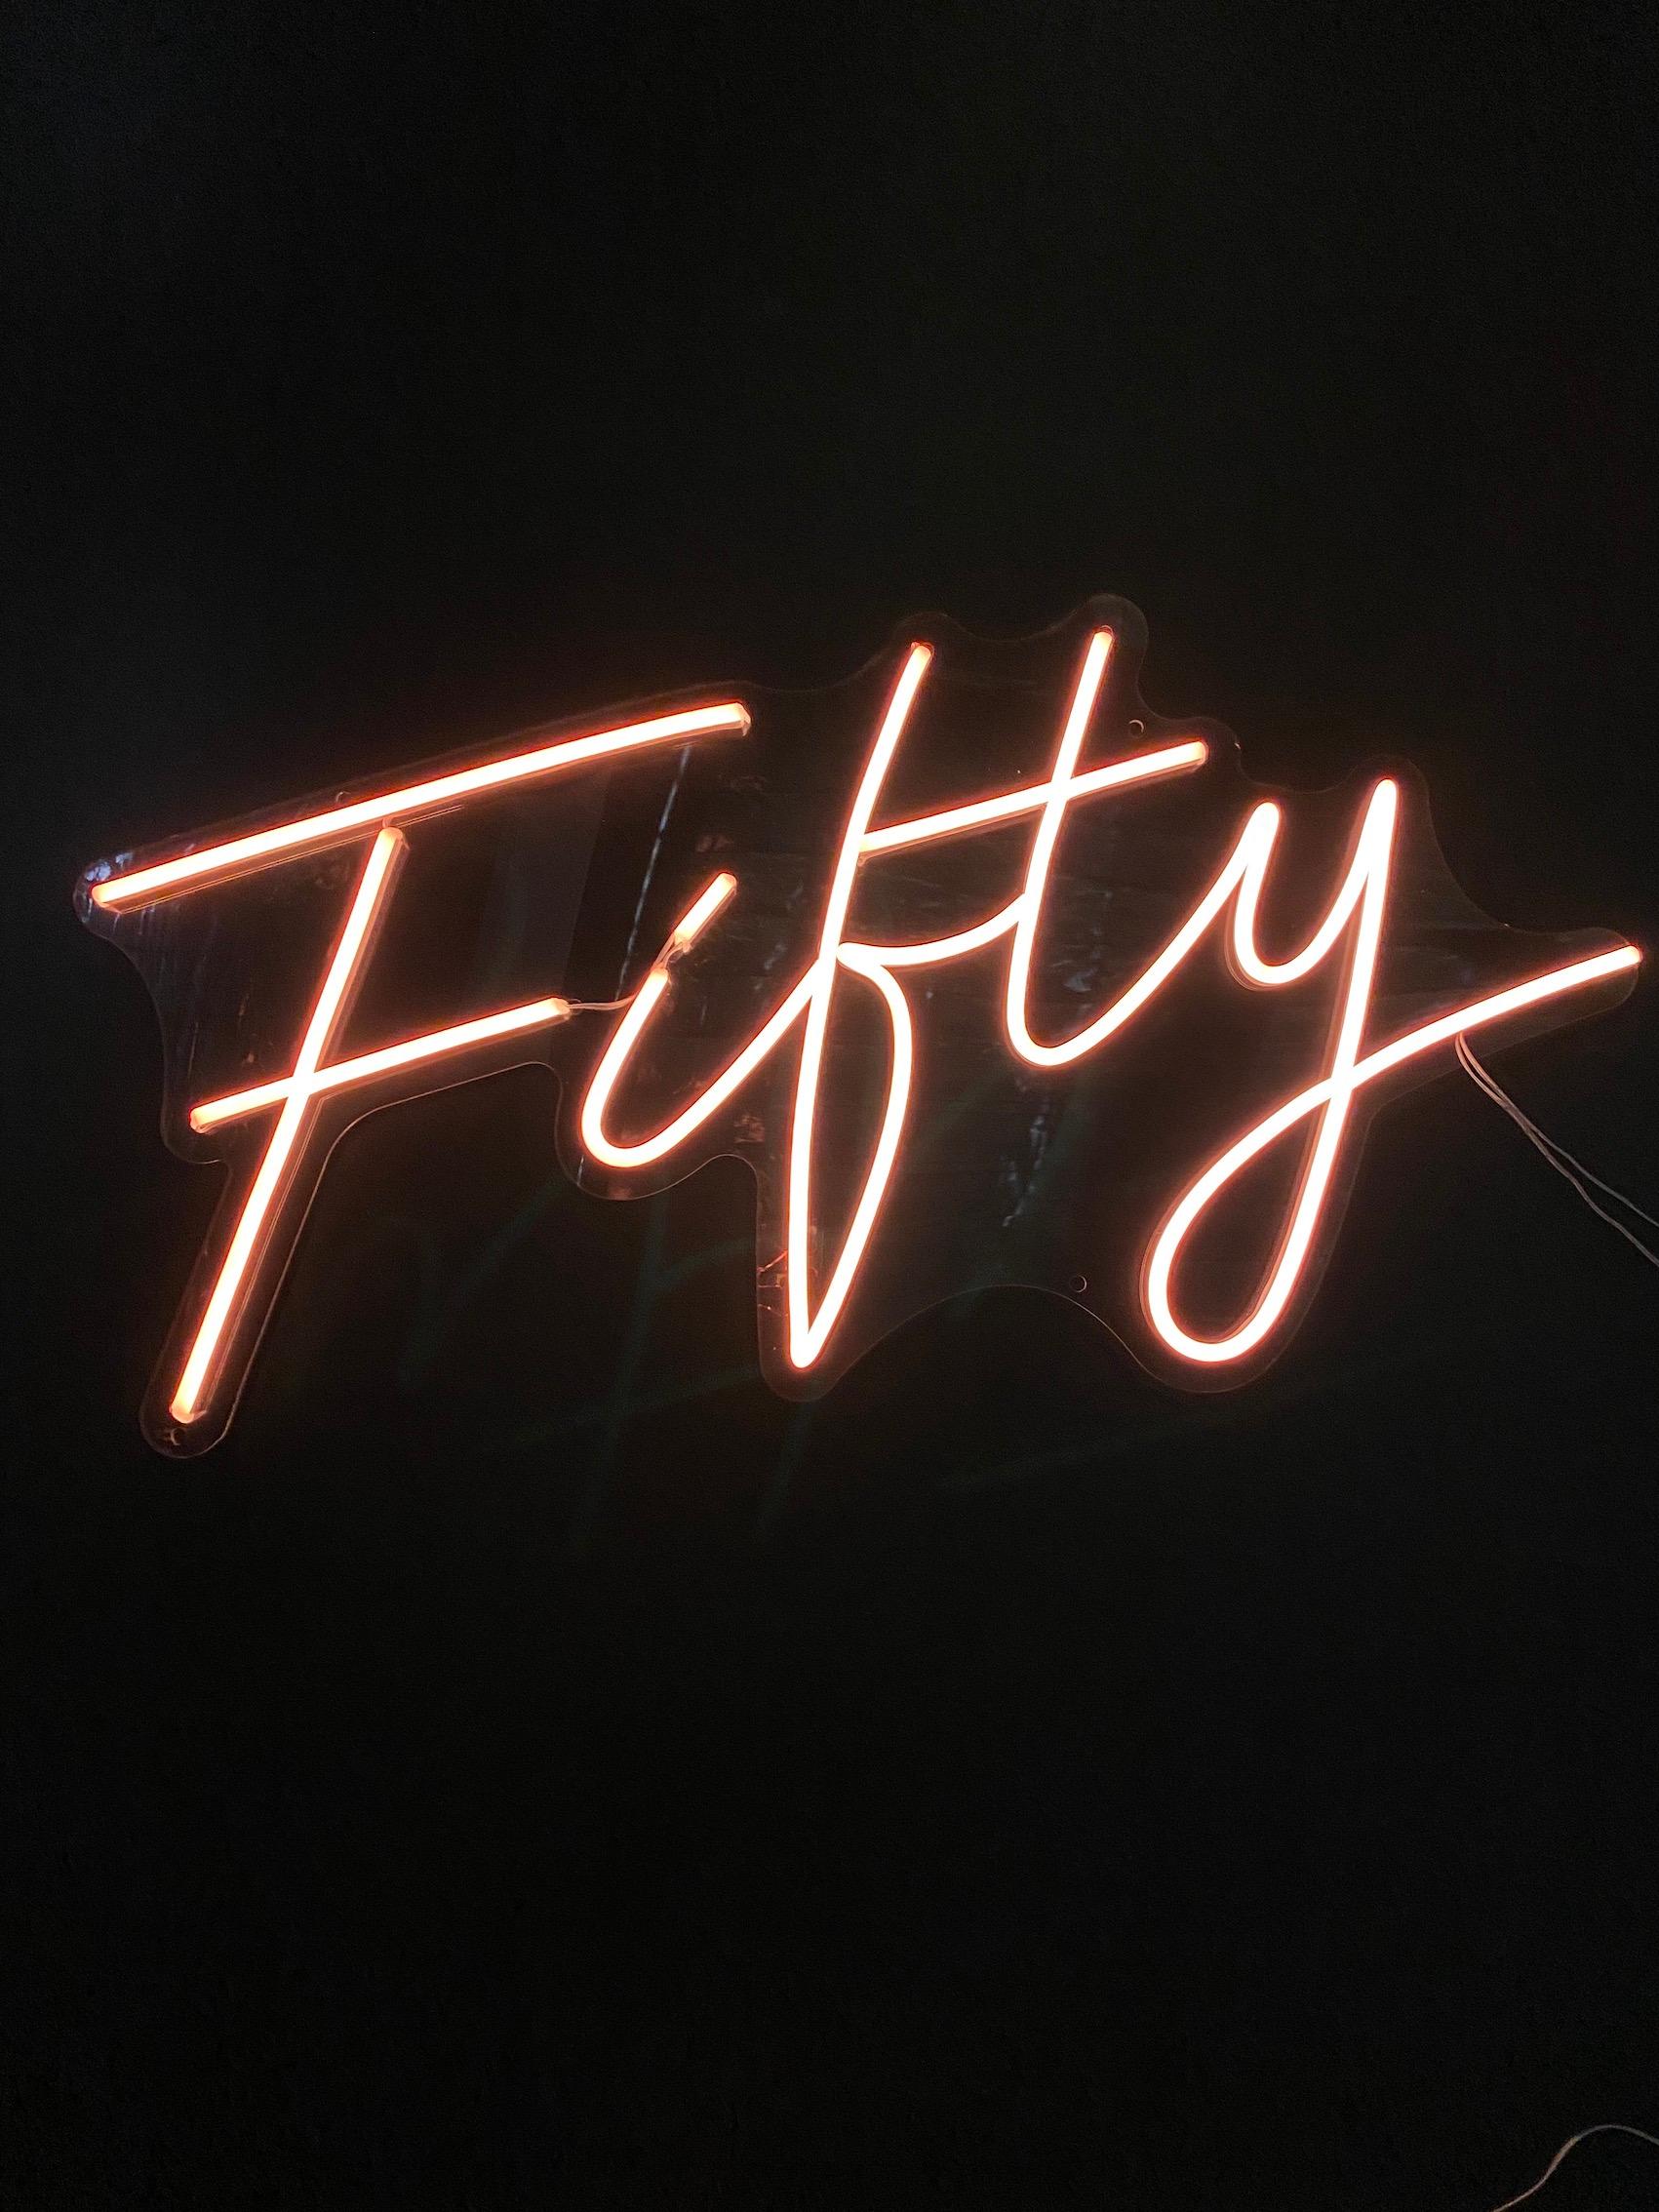 Fifty neon sign